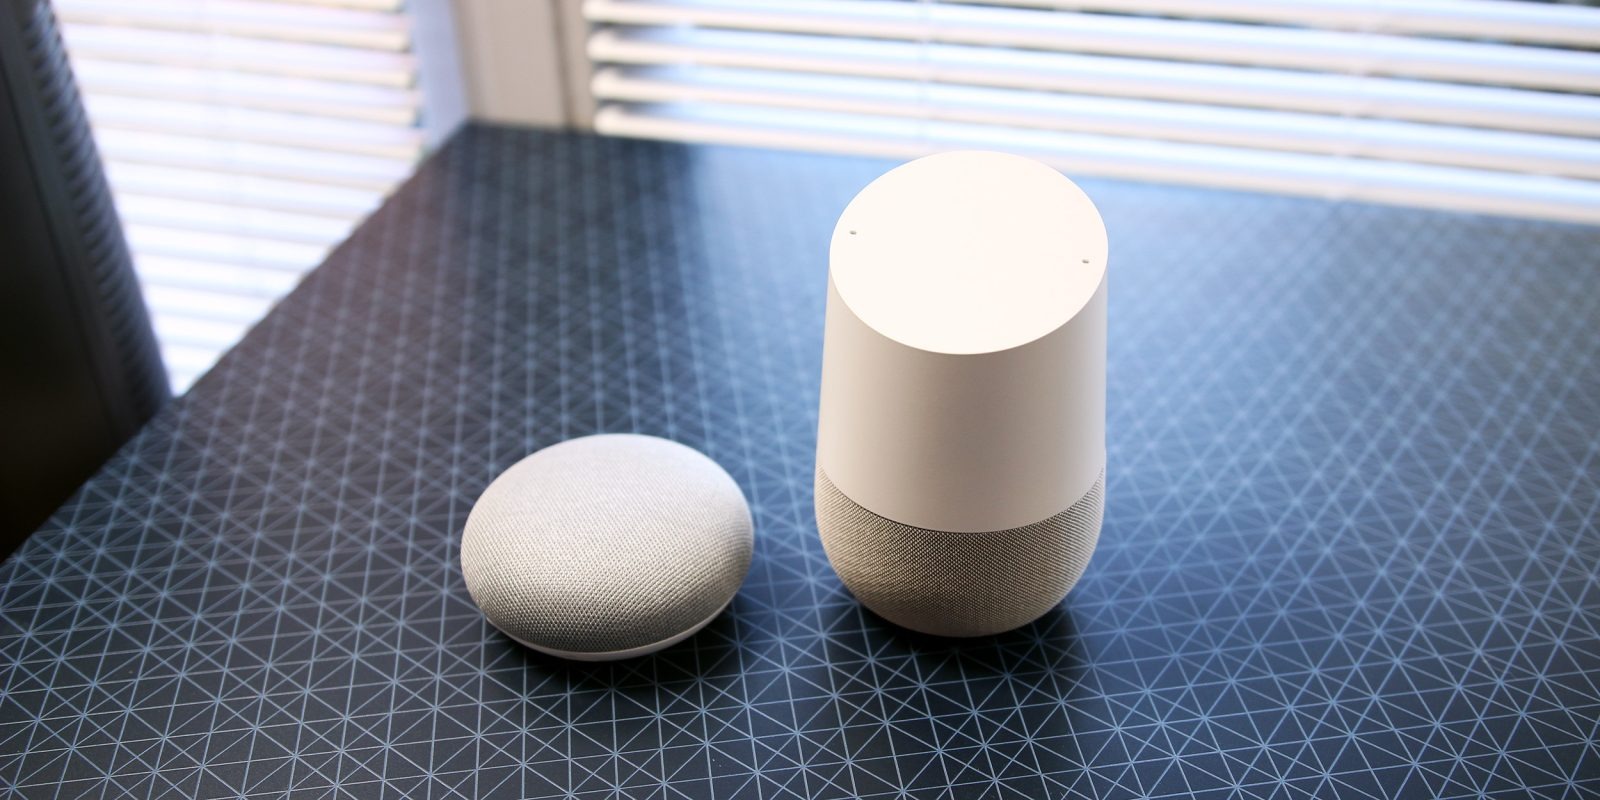 How To Use Google Home Mini Without Wi-Fi